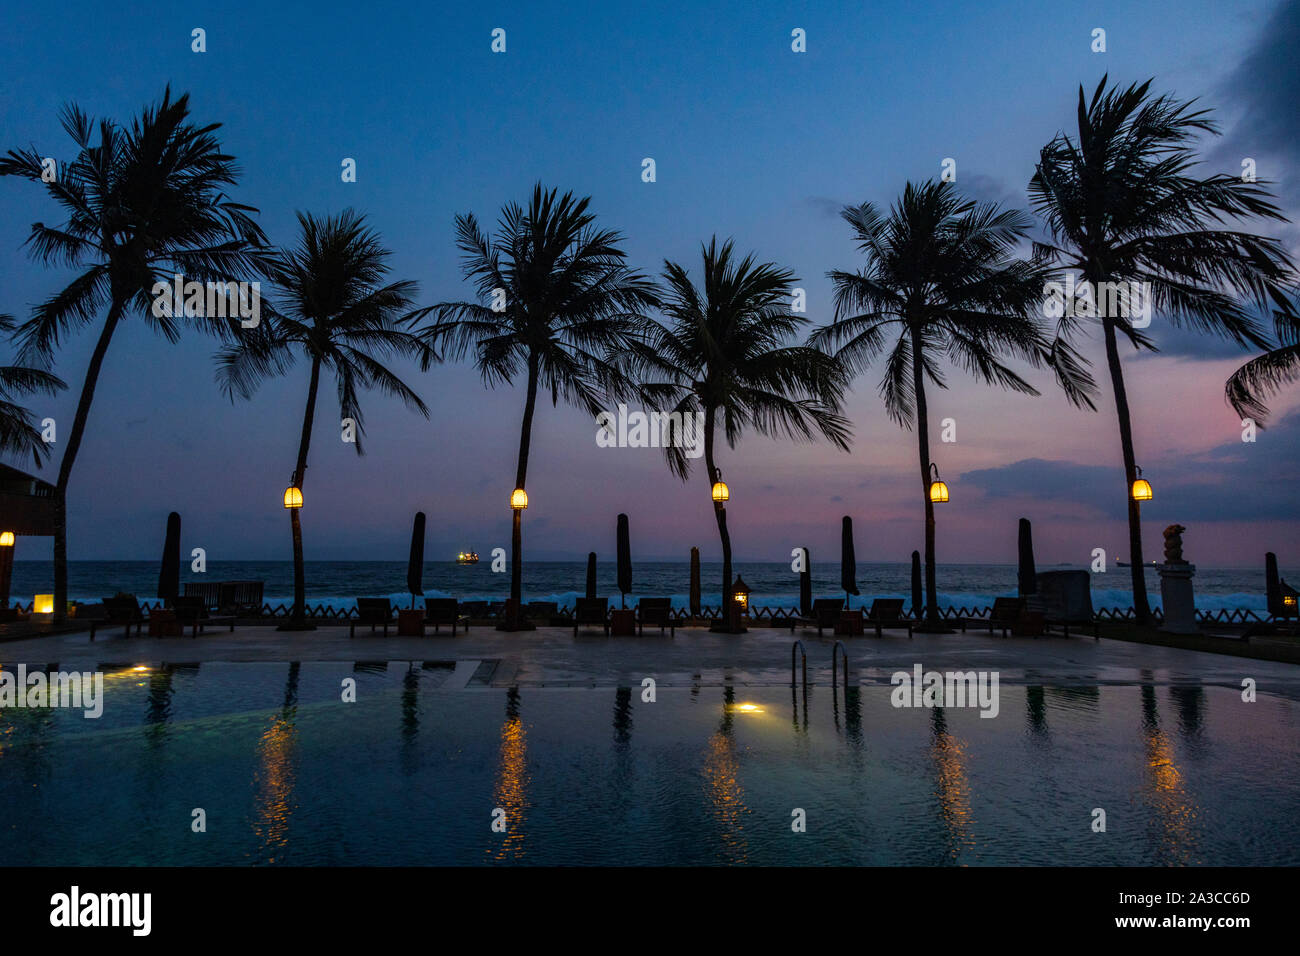 Swimming pool, palm trees and the Indian Ocean at dusk, resort in Candi Dasa or Candidasa, Bali, Indonesia, Asia Stock Photo